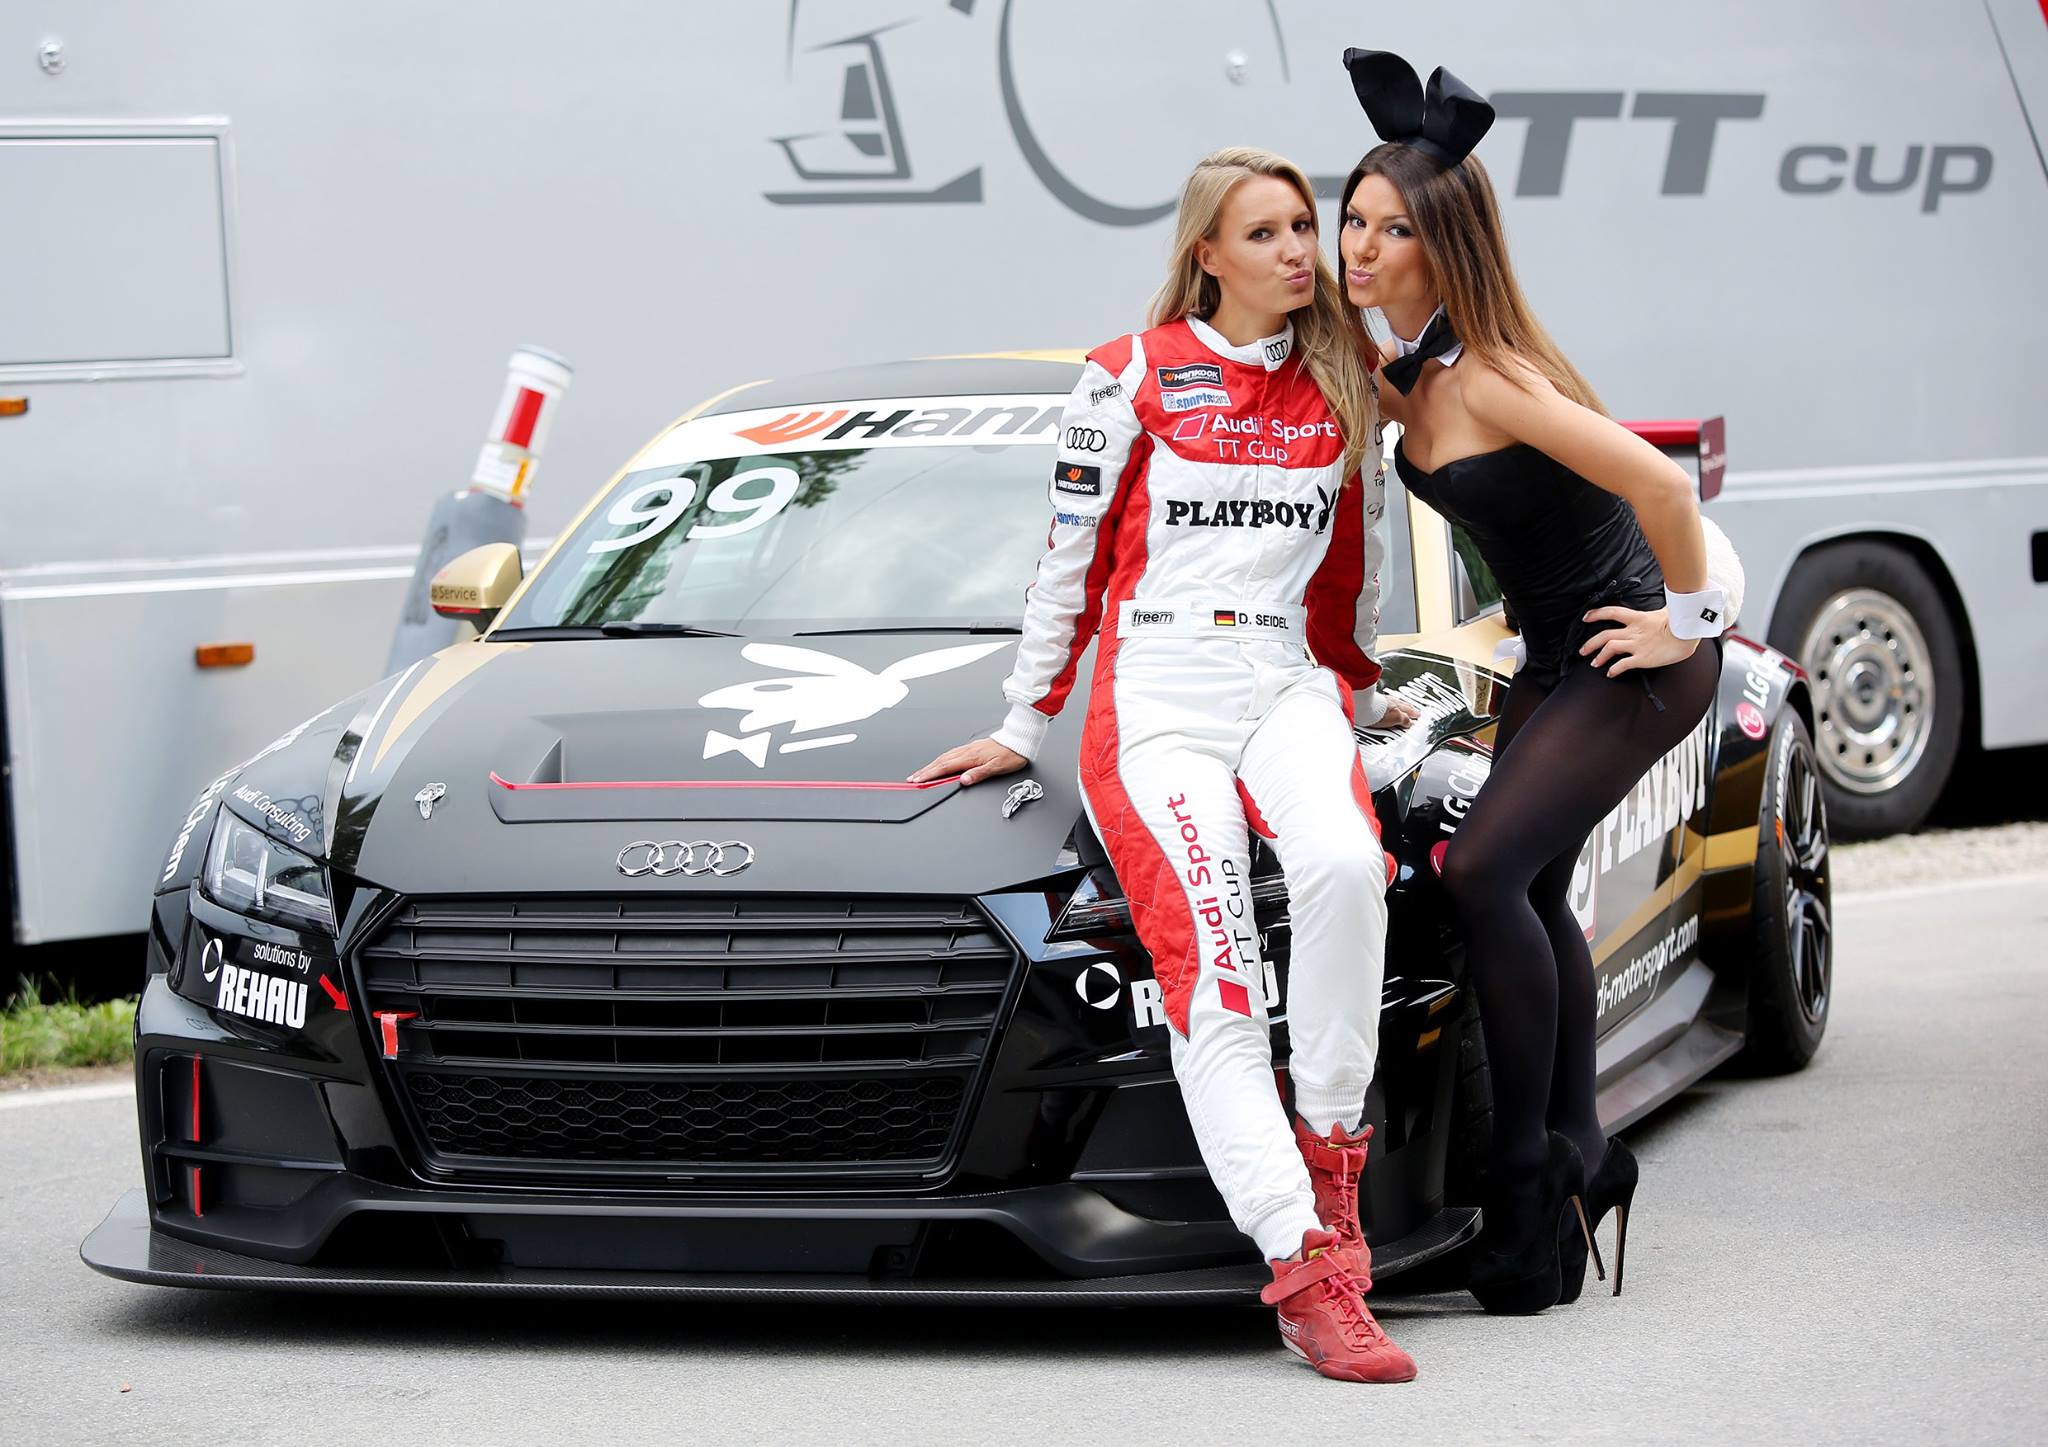 blonde audi race driver does duckface kiss with playboy bunny lol 97174_1